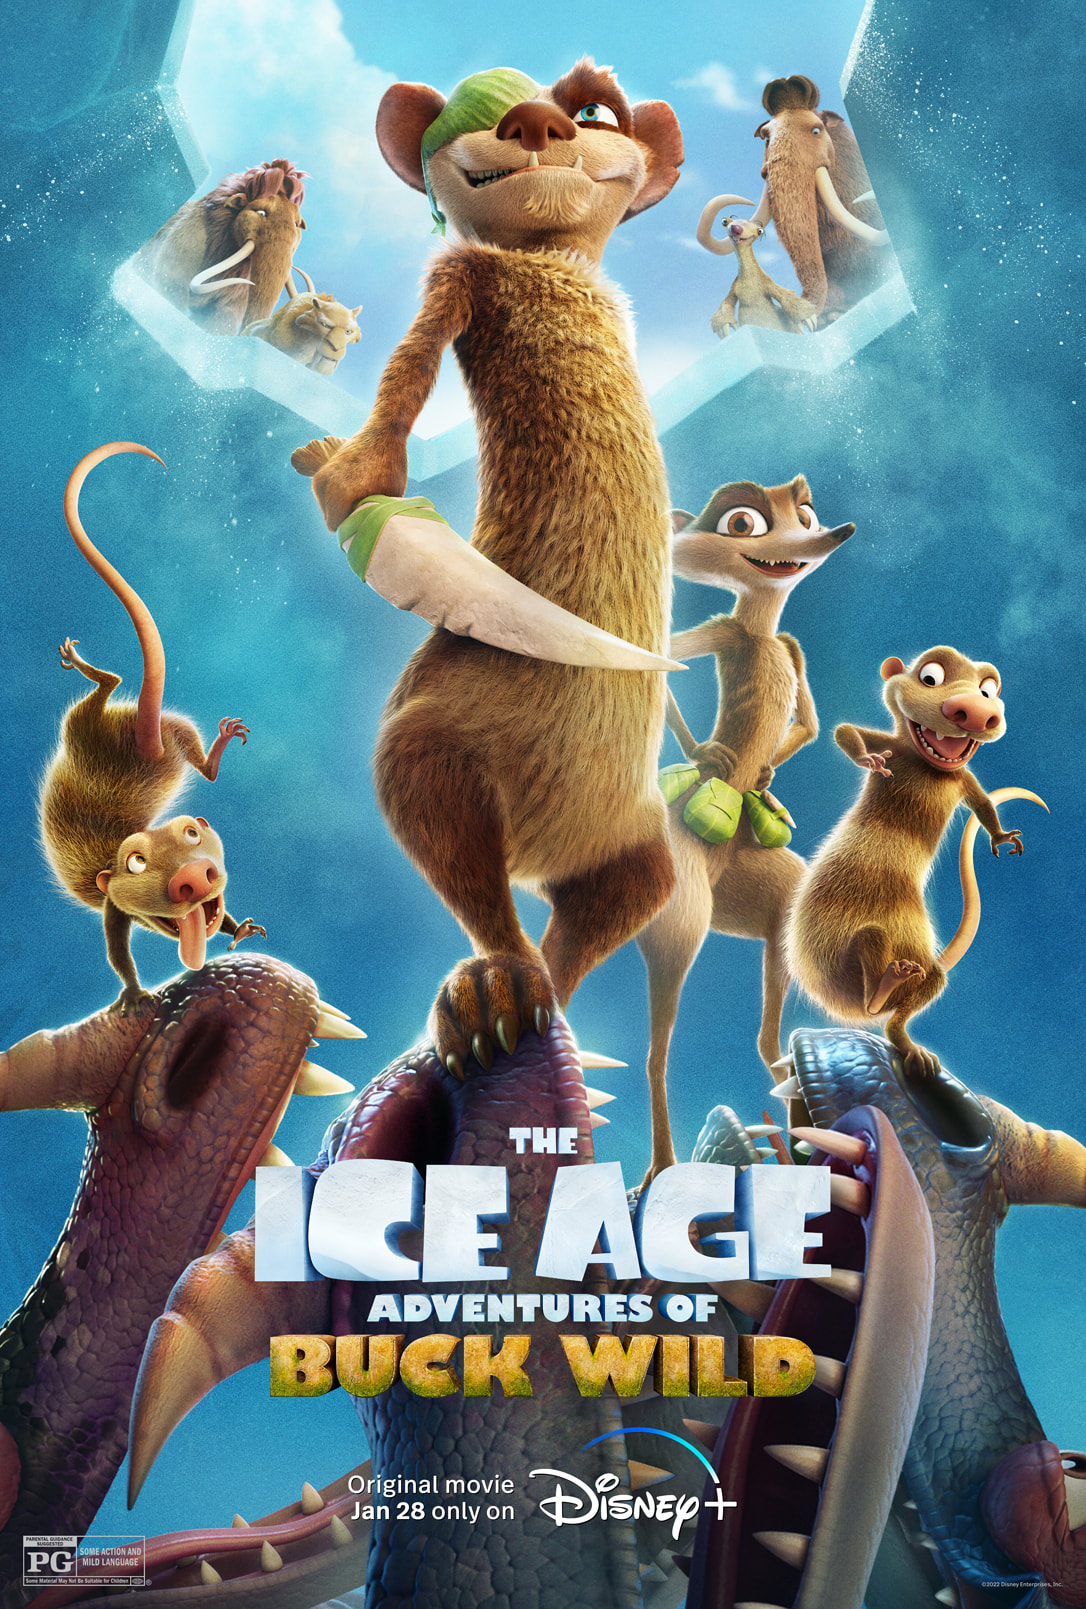 The Ice Age Adventures of Buck Wild debuts on Disney+ on January 28